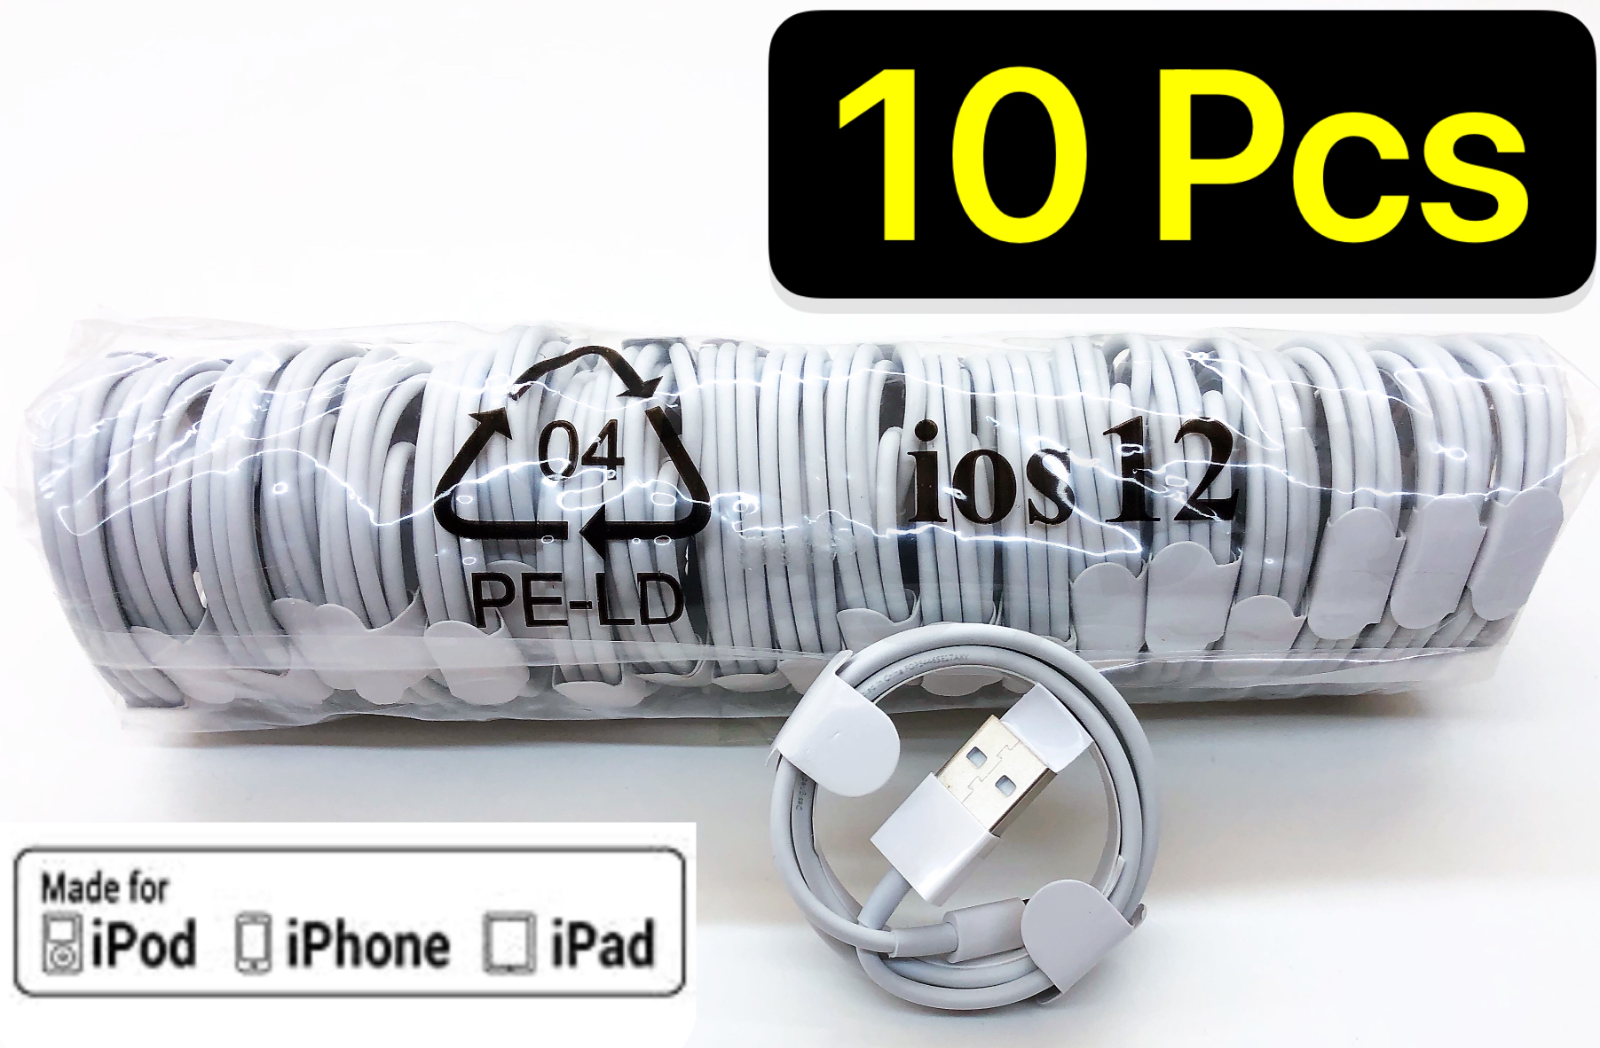 10 Pcs Charger Cable Heavy Duty Charging Cord For iPhone 6 7 8 iPhone11 XS XR 5